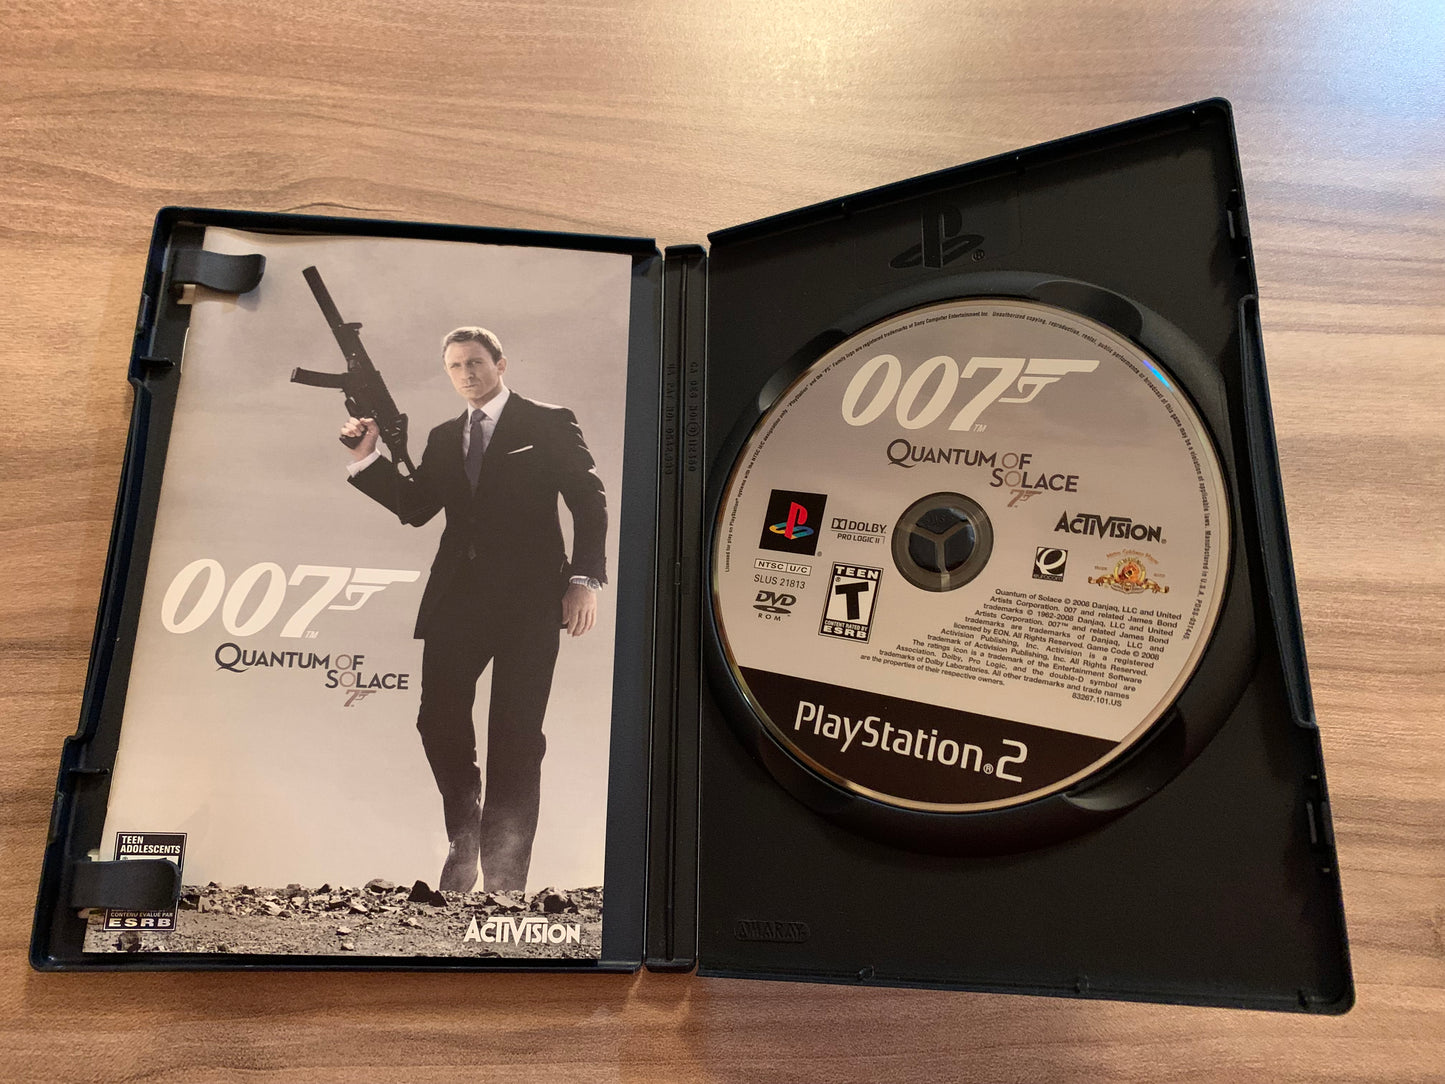 SONY PLAYSTATiON 2 [PS2] | 007 QUANTUM OF SOLACE